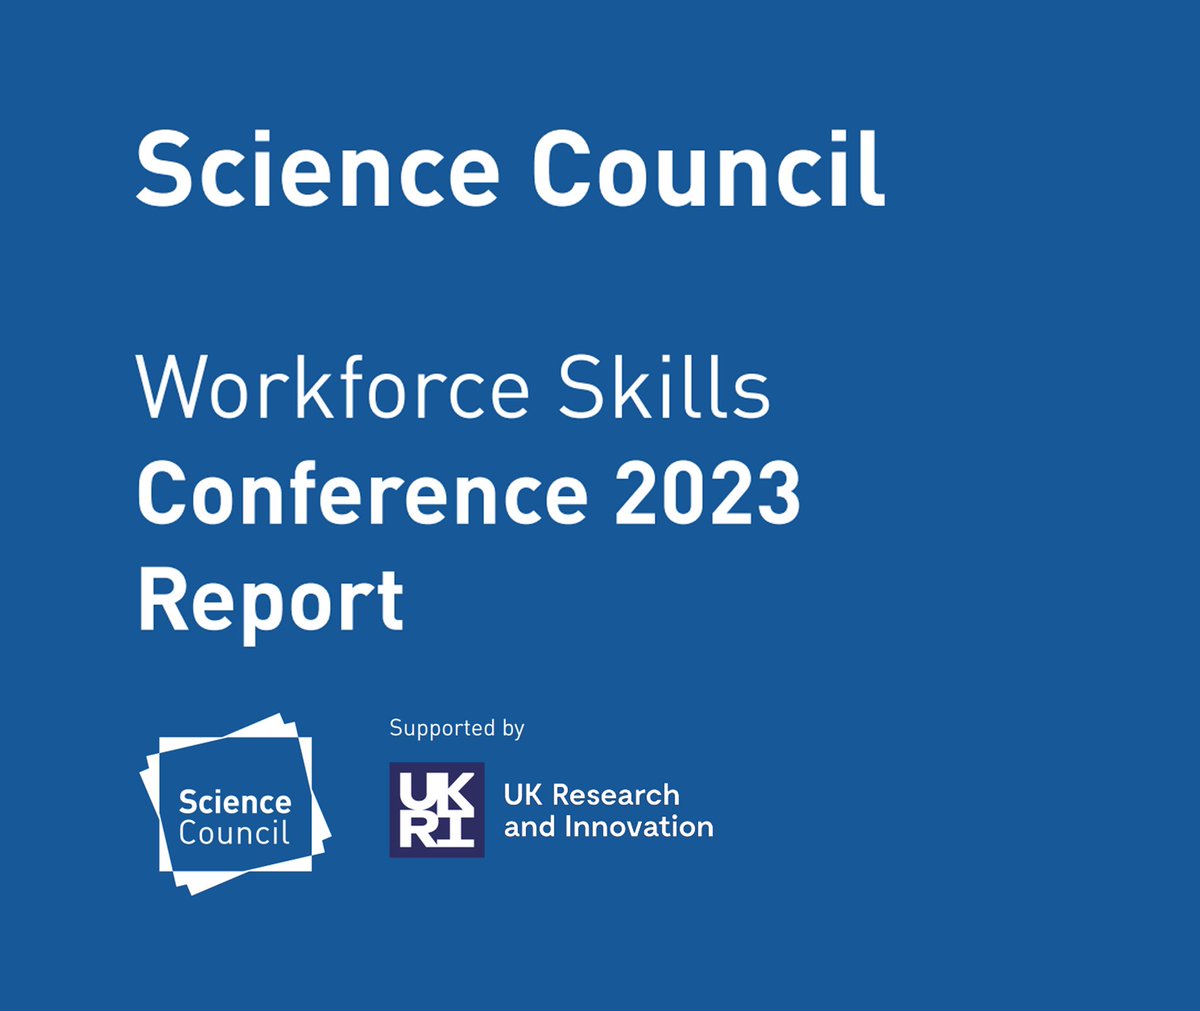 📢The @Science_Council Workforce Skills Conference report has launched! This report captures discussions on key topics from the event and the fantastic work across our community. Conference report and videos: sciencecouncil.org/blog/2024/04/0… #WorkforceSkills @UKRI_News @PhysicsNews